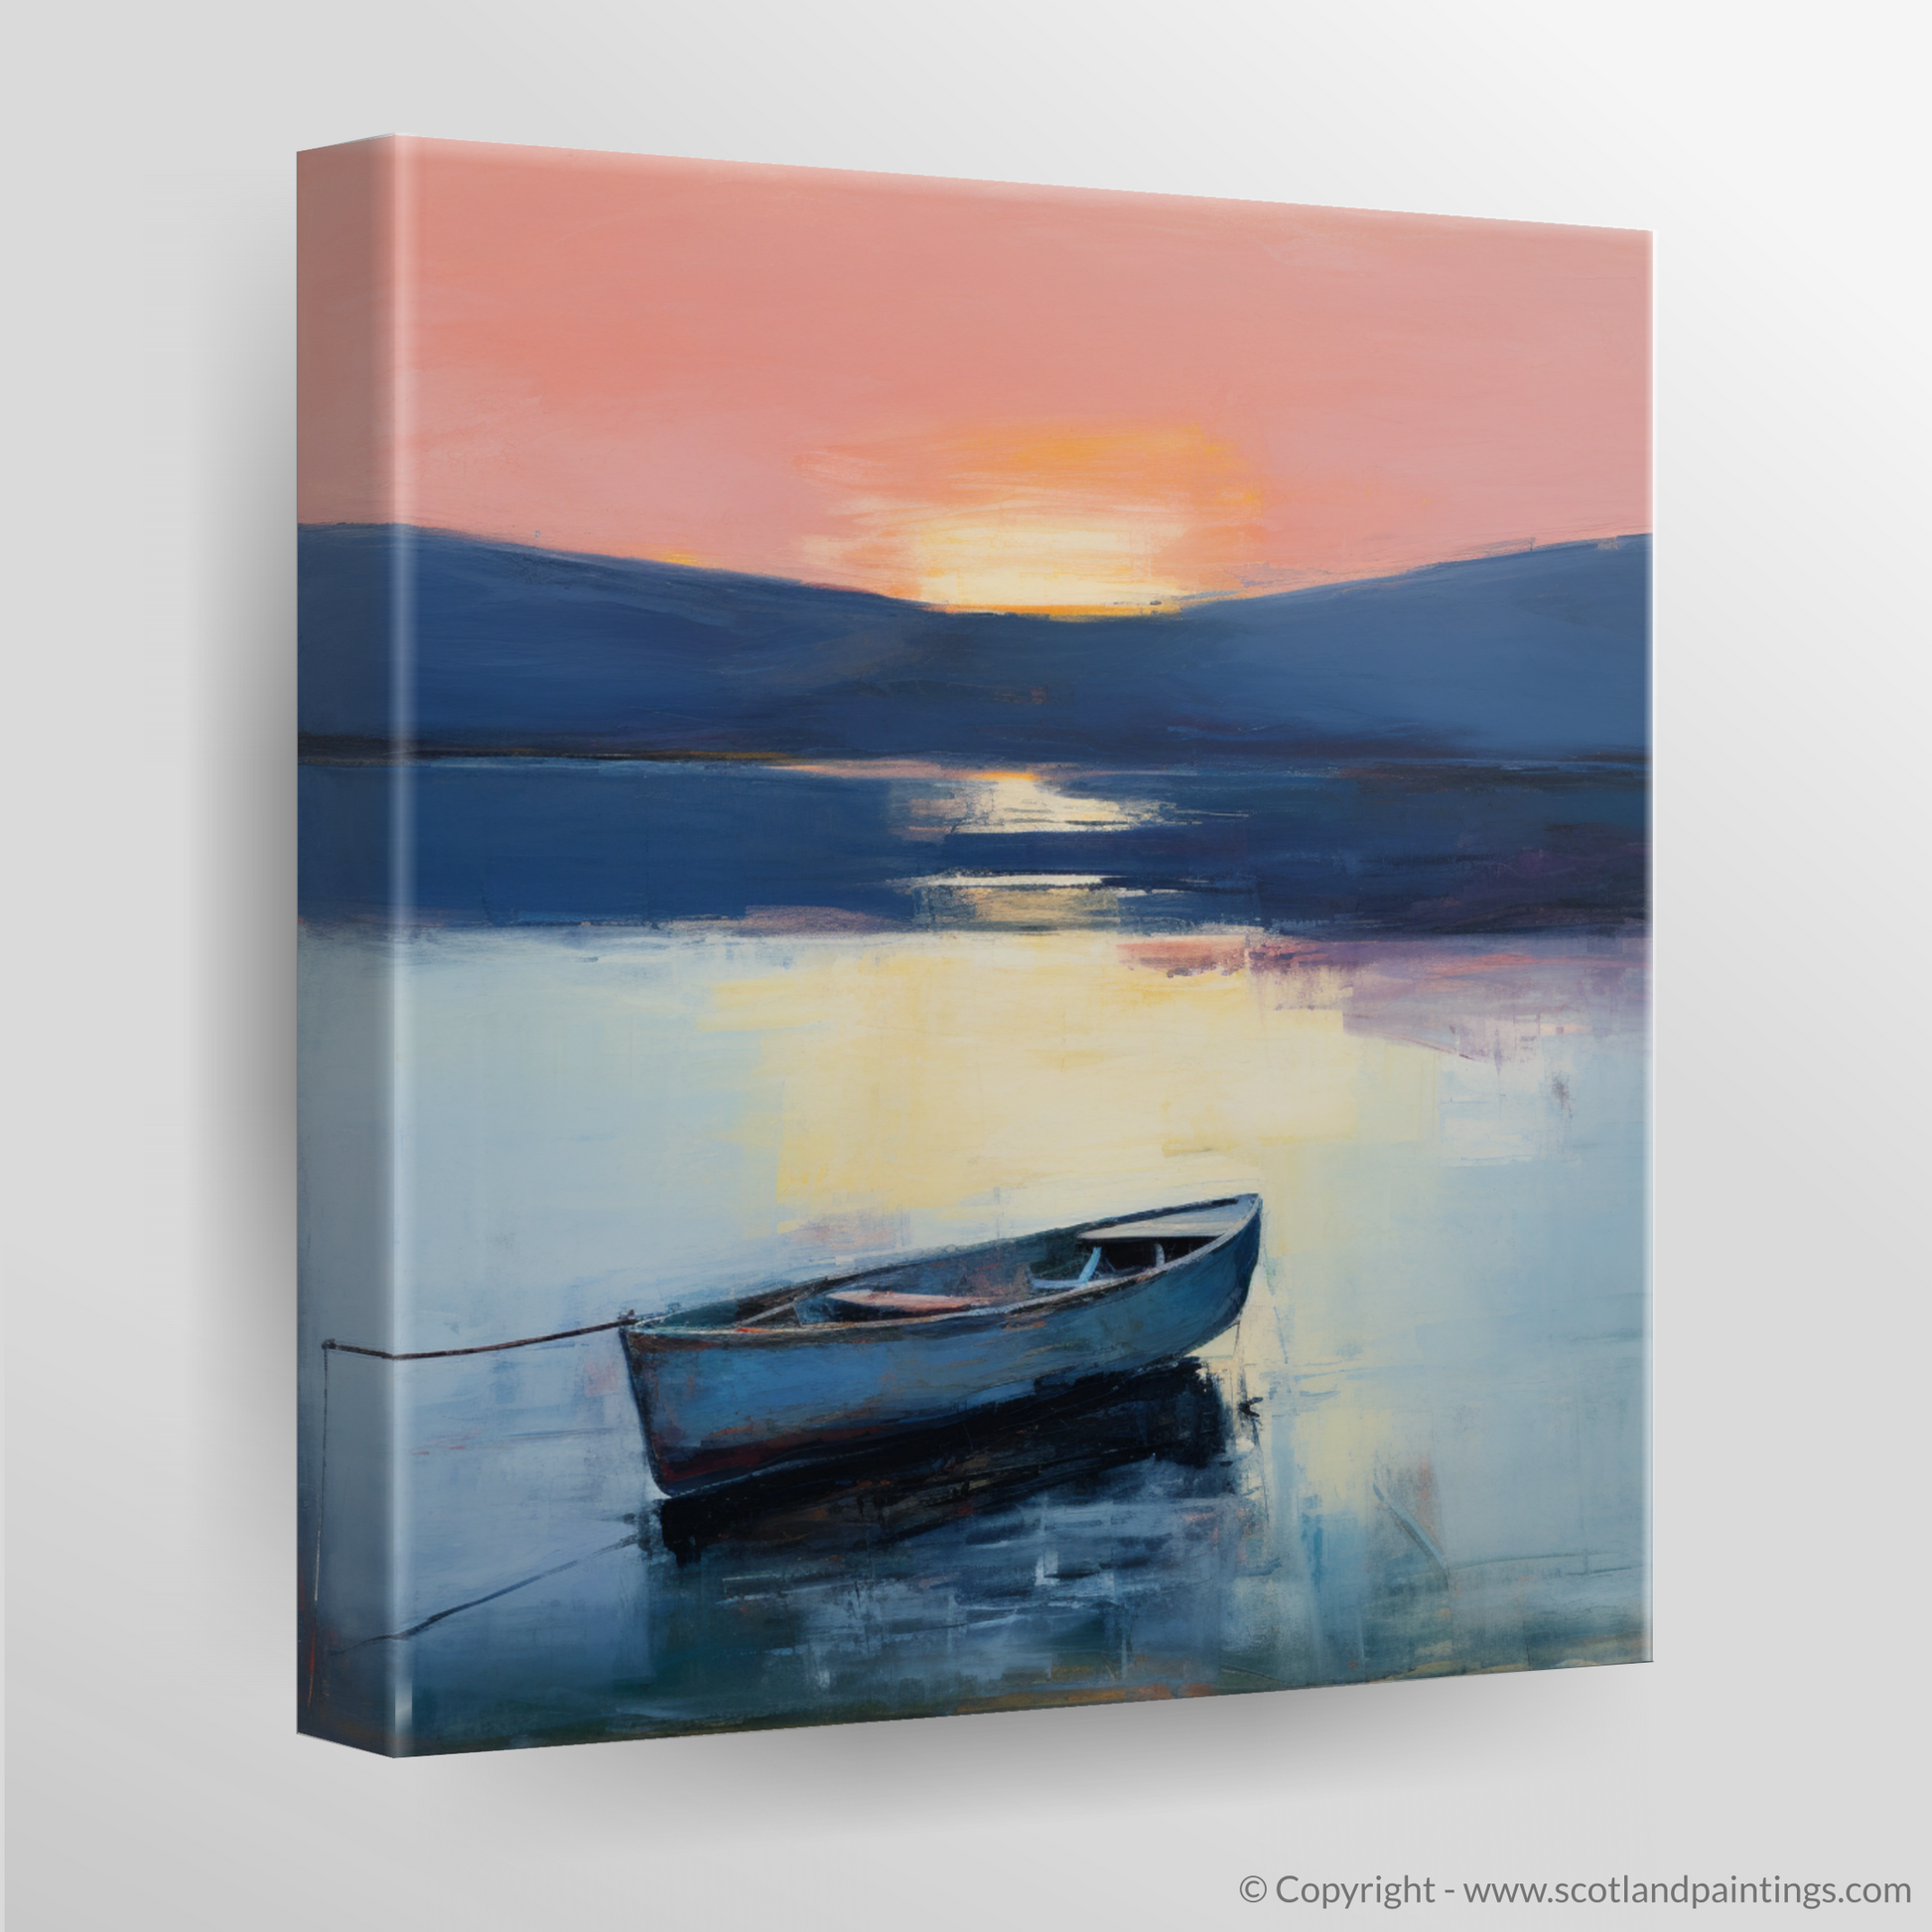 Canvas Print of Lone rowboat on Loch Lomond at dusk